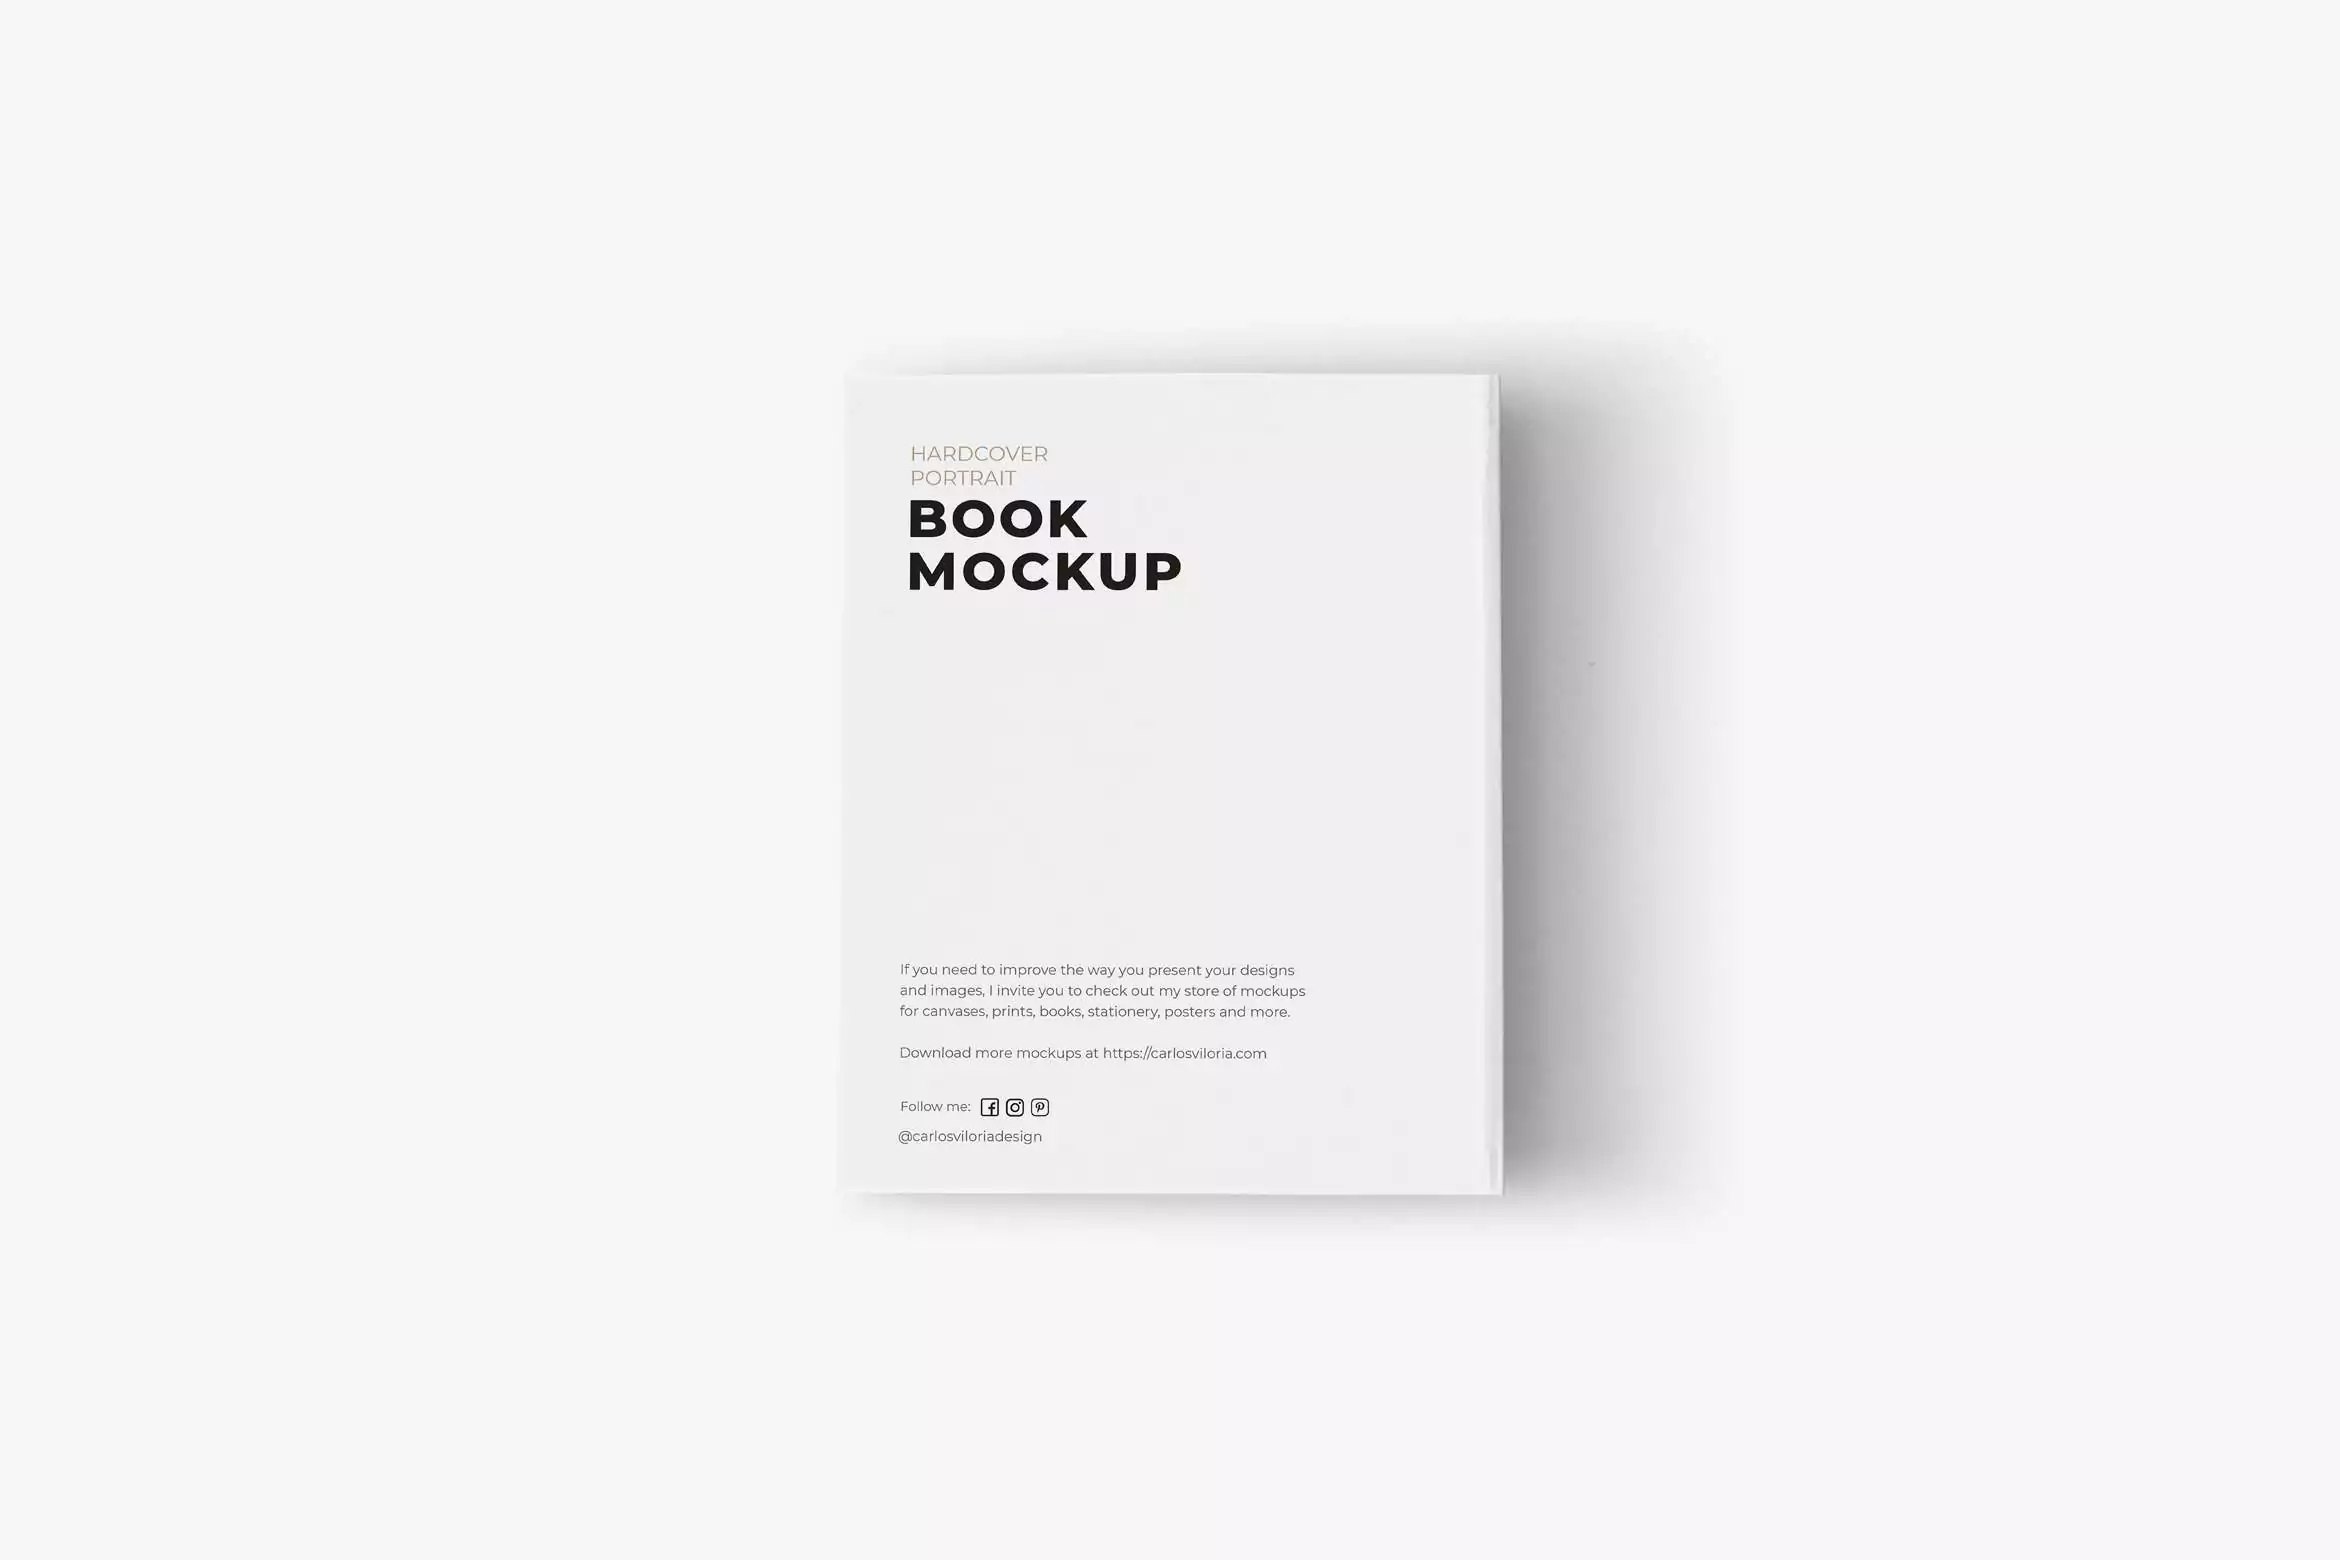 Front-back Hardcover Book Mockup - 8x10 in